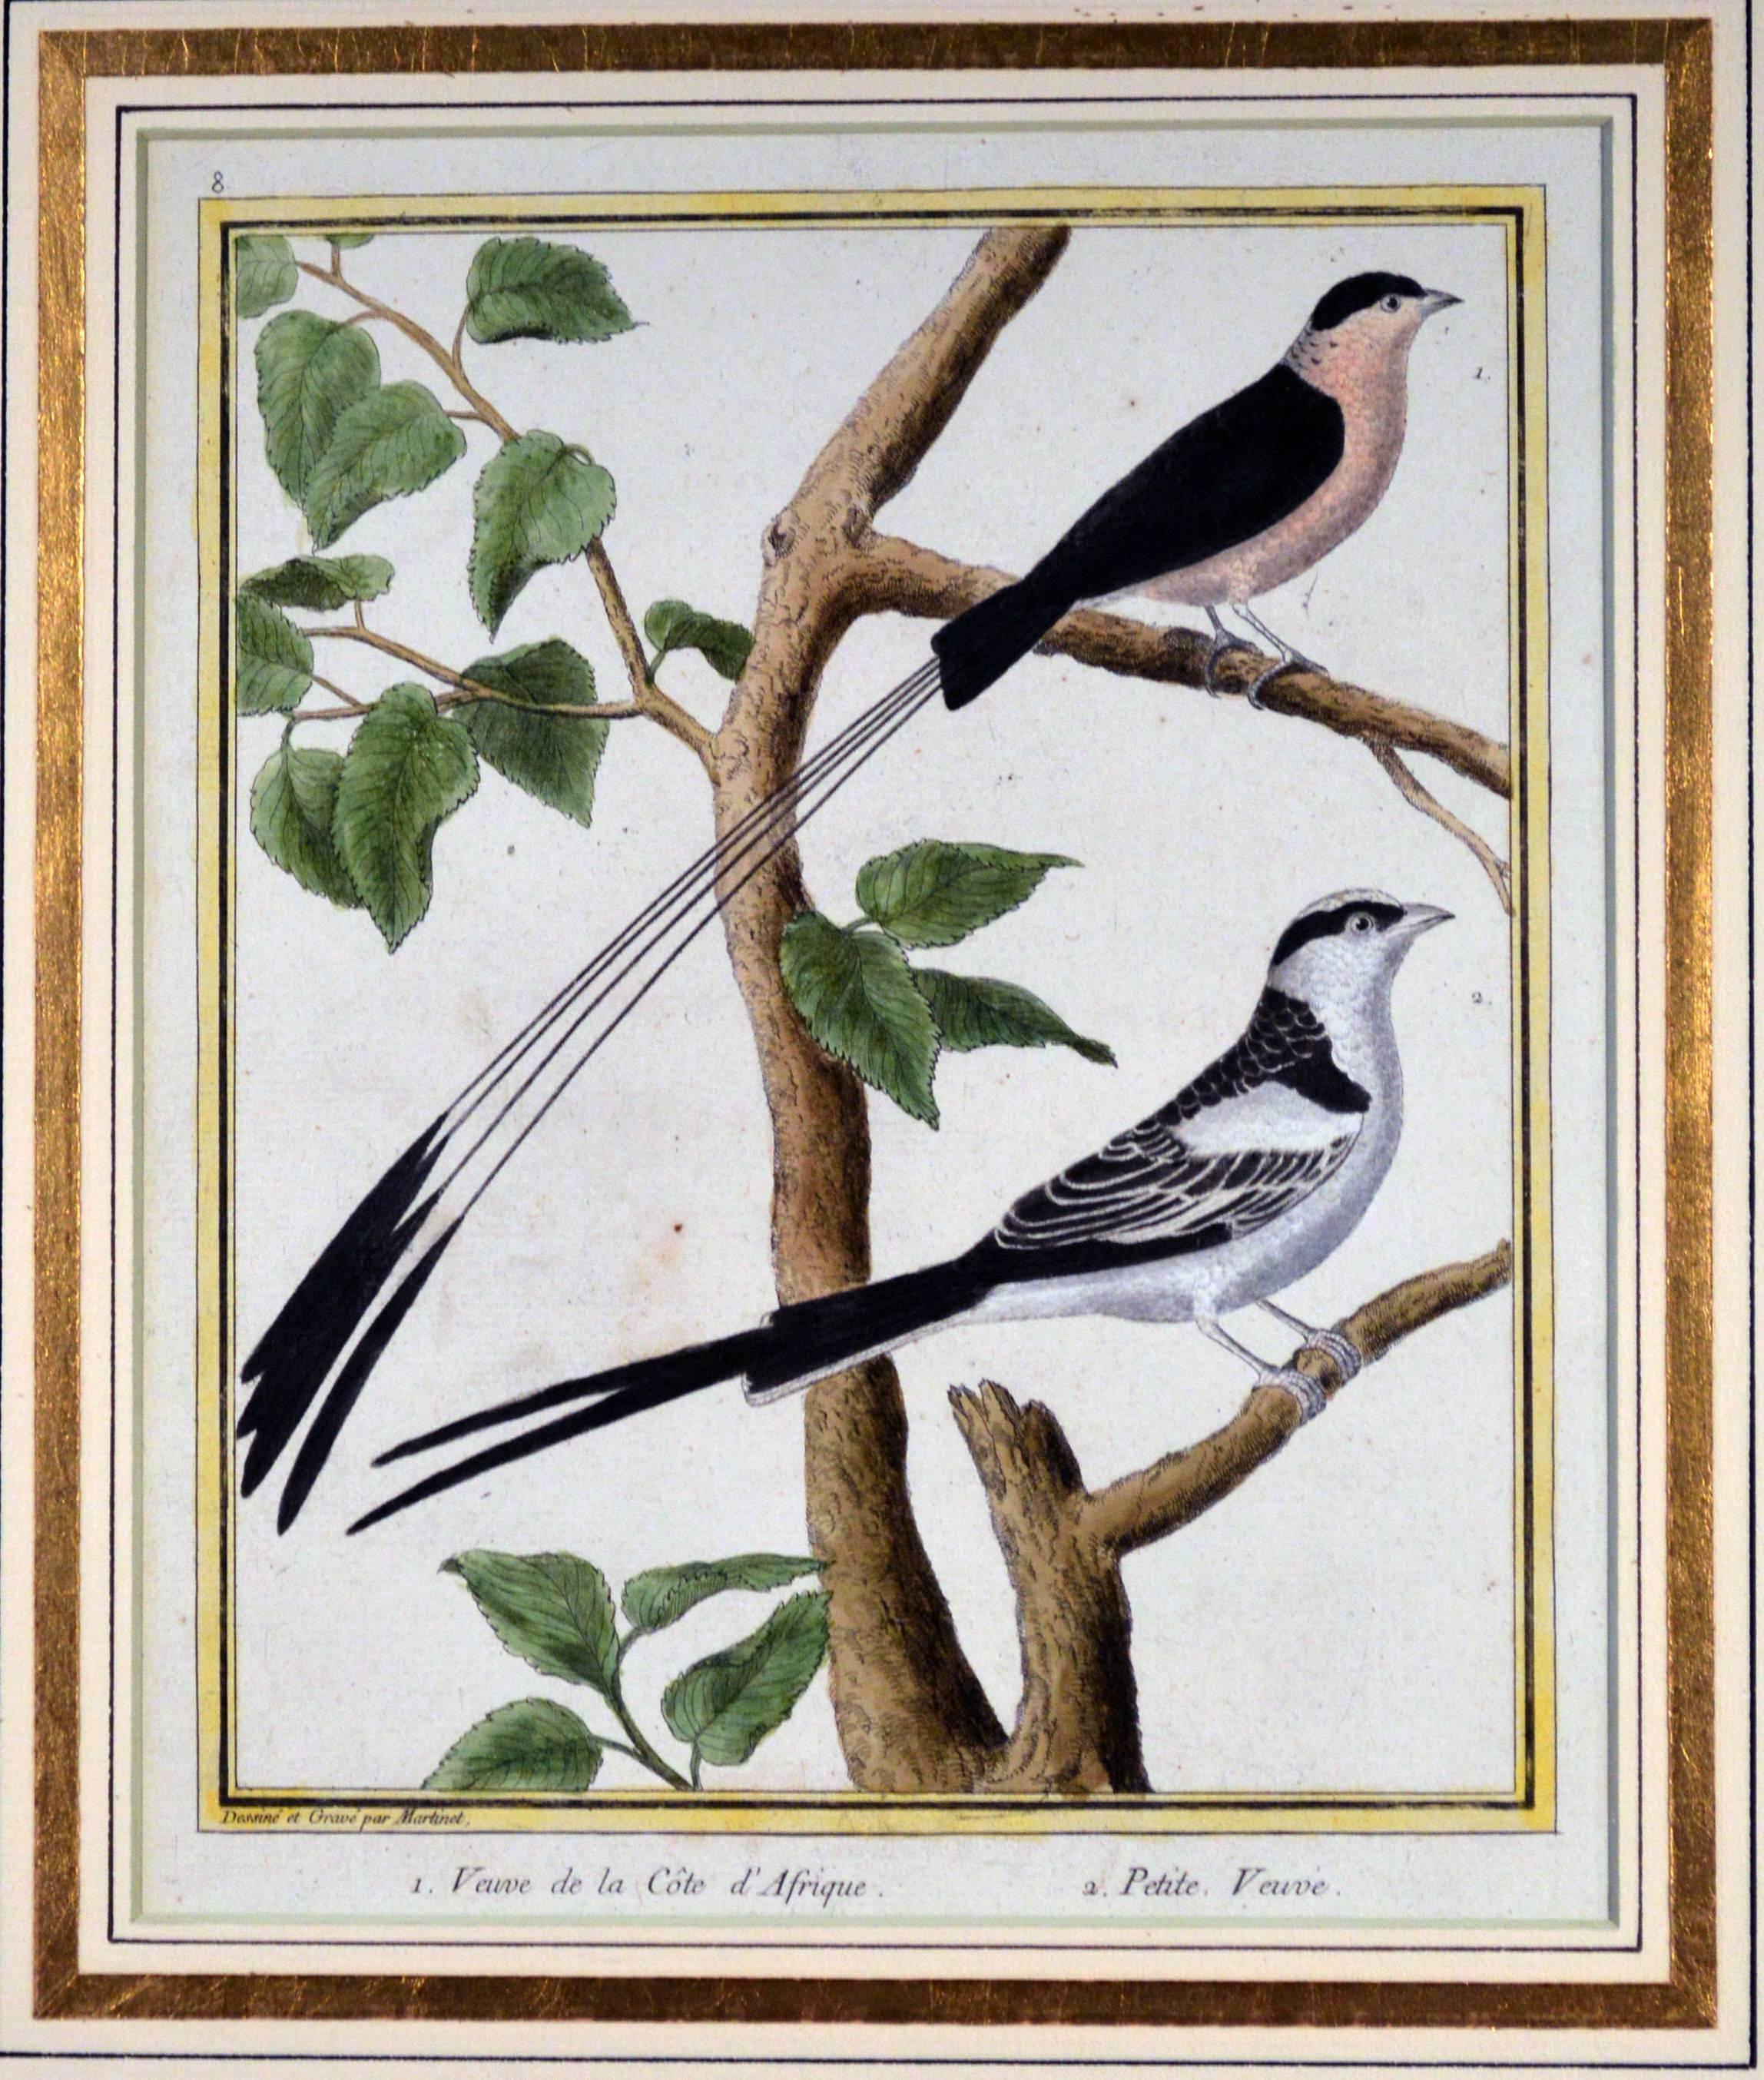 Francois Nicholas Martinet bird engravings,
Set of six,
circa 1770.

This a set of six but we have another set listed separately which match these to make twelve.

The framed Francois Martinet engravings From Buffon's Historie Naturelle des Oiseaux